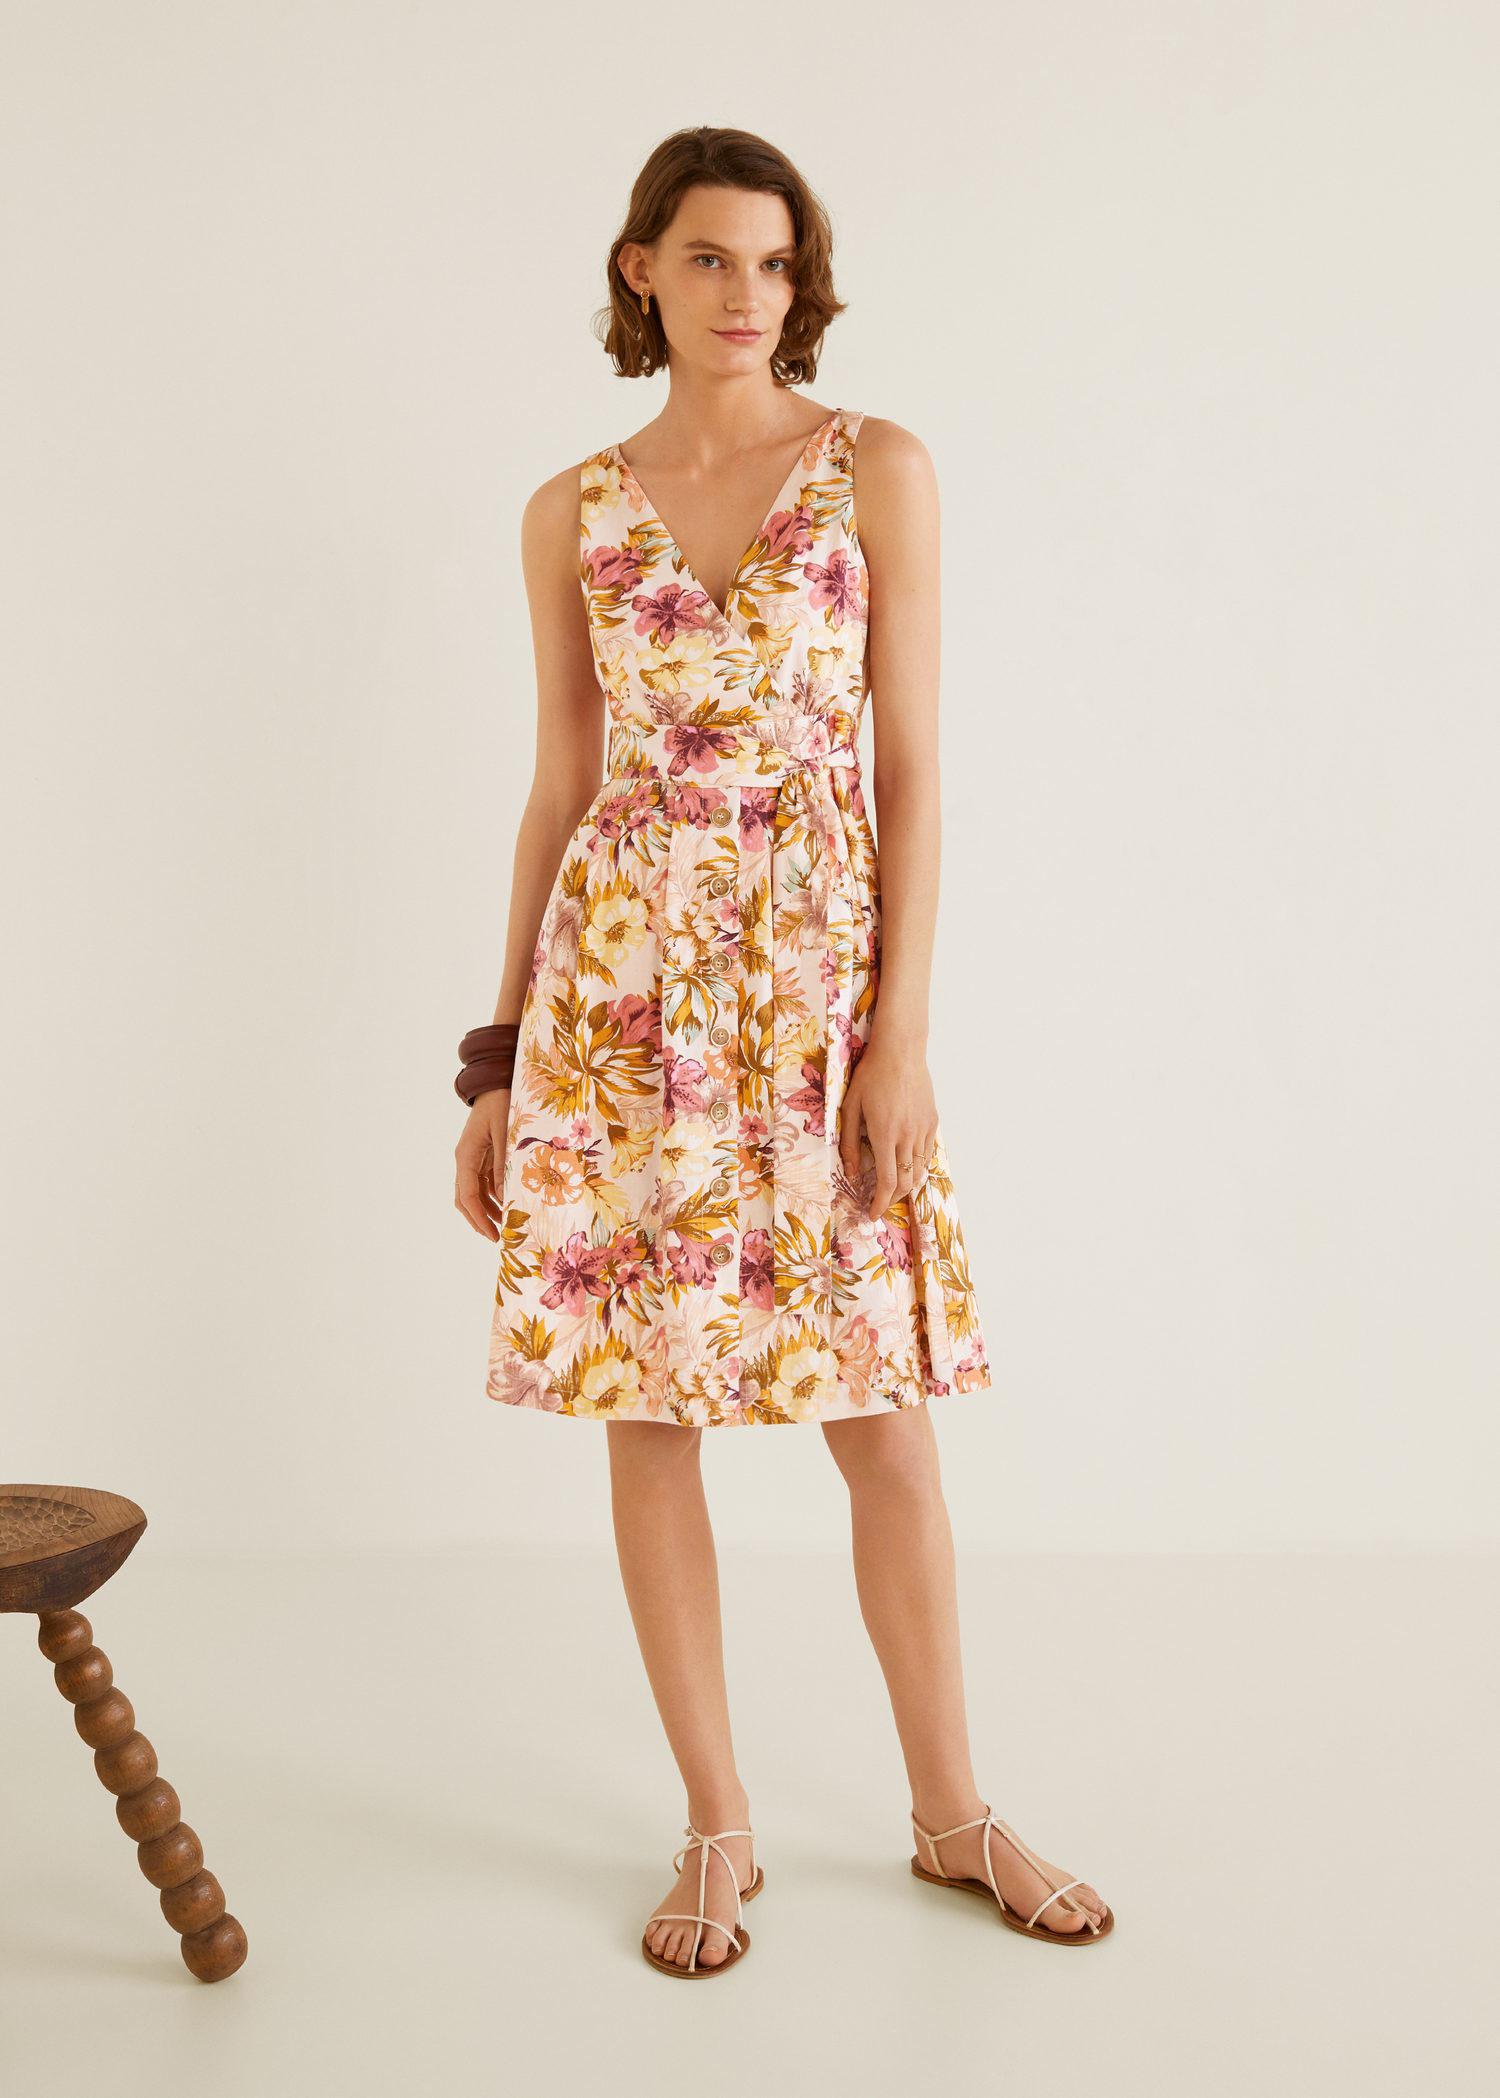 Purchase > mango floral linen blend dress, Up to 66% OFF